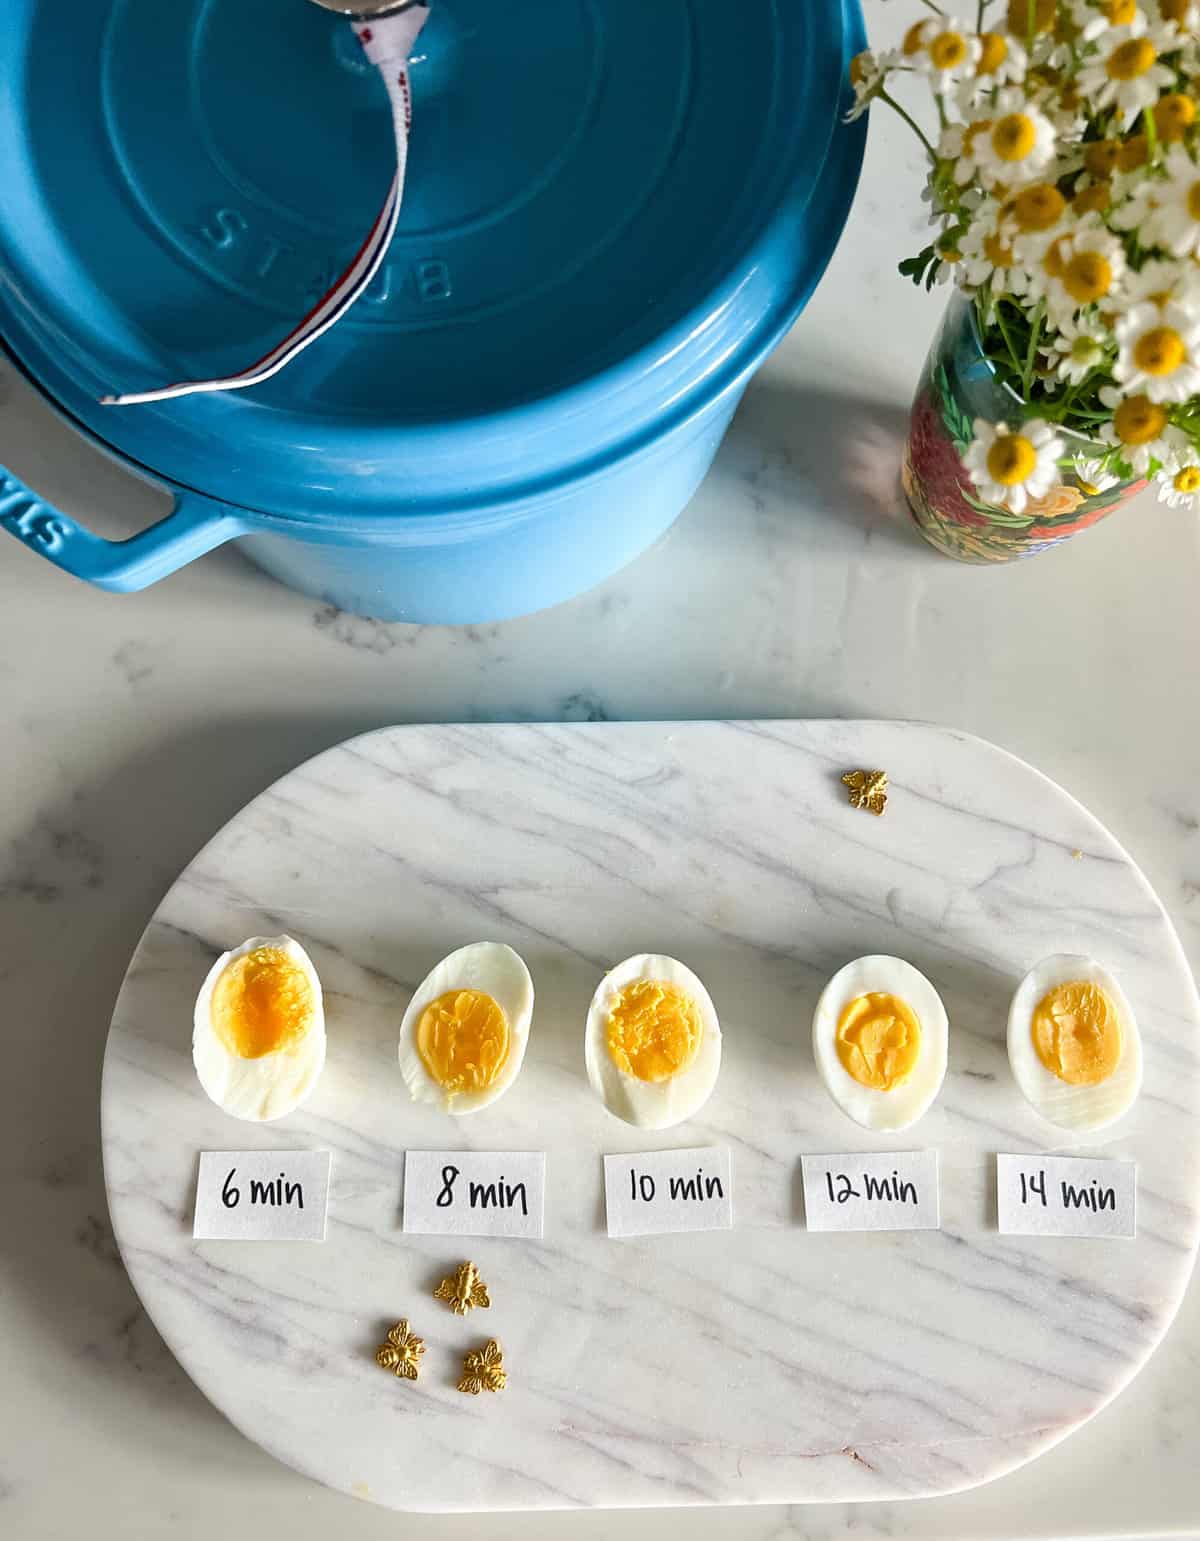 How to cook hard boiled eggs. What is the cooking time for hard boiled eggs? How long should I cook hard boiled eggs? Hard boiling eggs times.